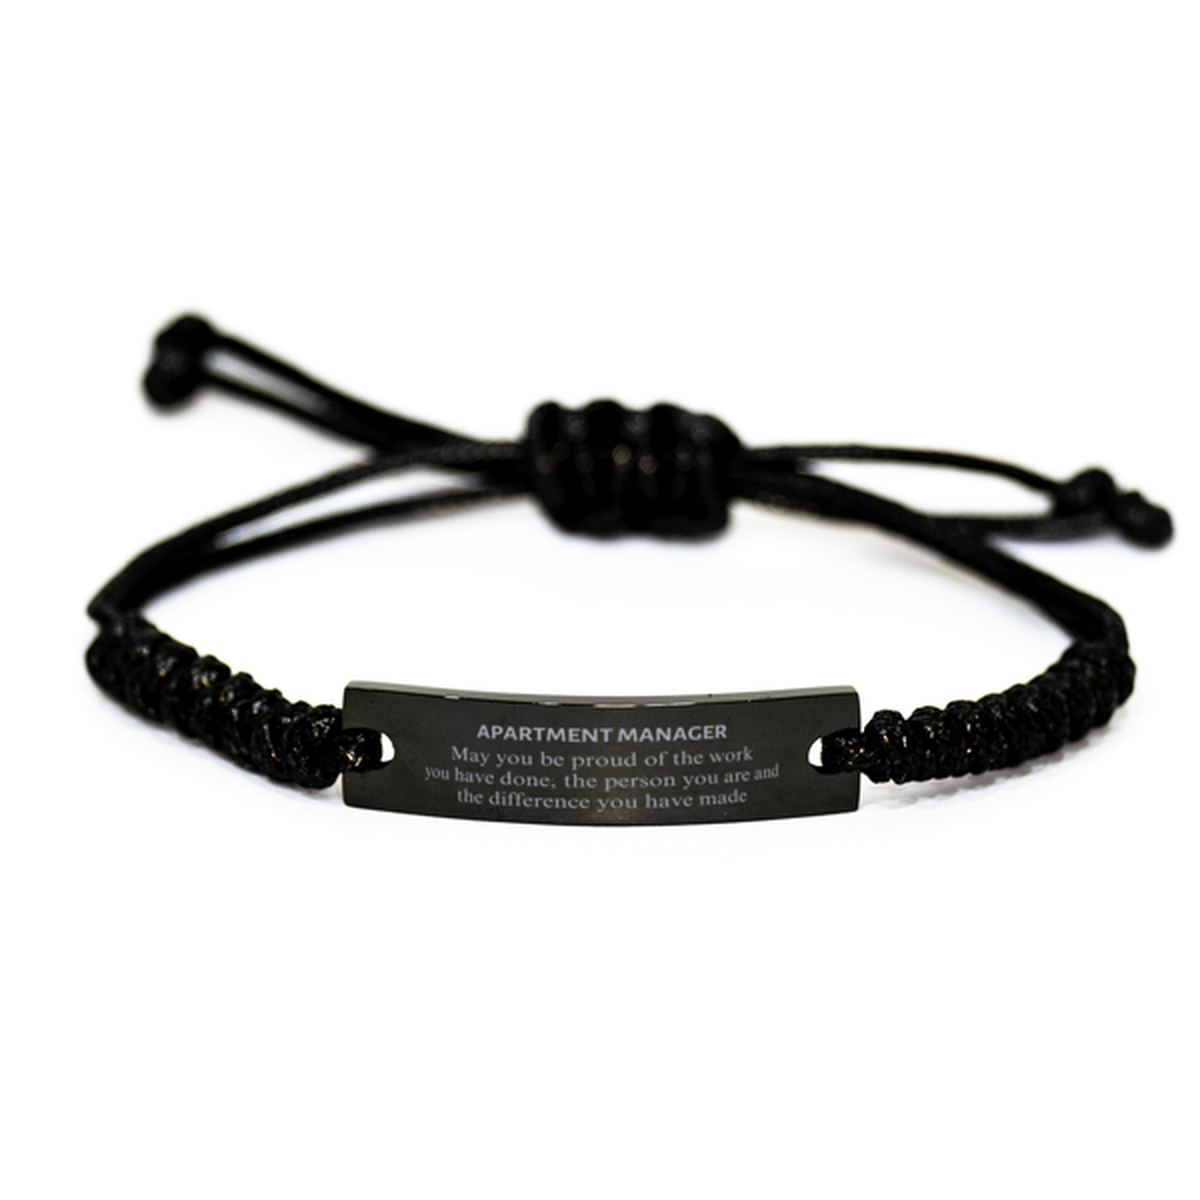 Apartment Manager May you be proud of the work you have done, Retirement Apartment Manager Black Rope Bracelet for Colleague Appreciation Gifts Amazing for Apartment Manager